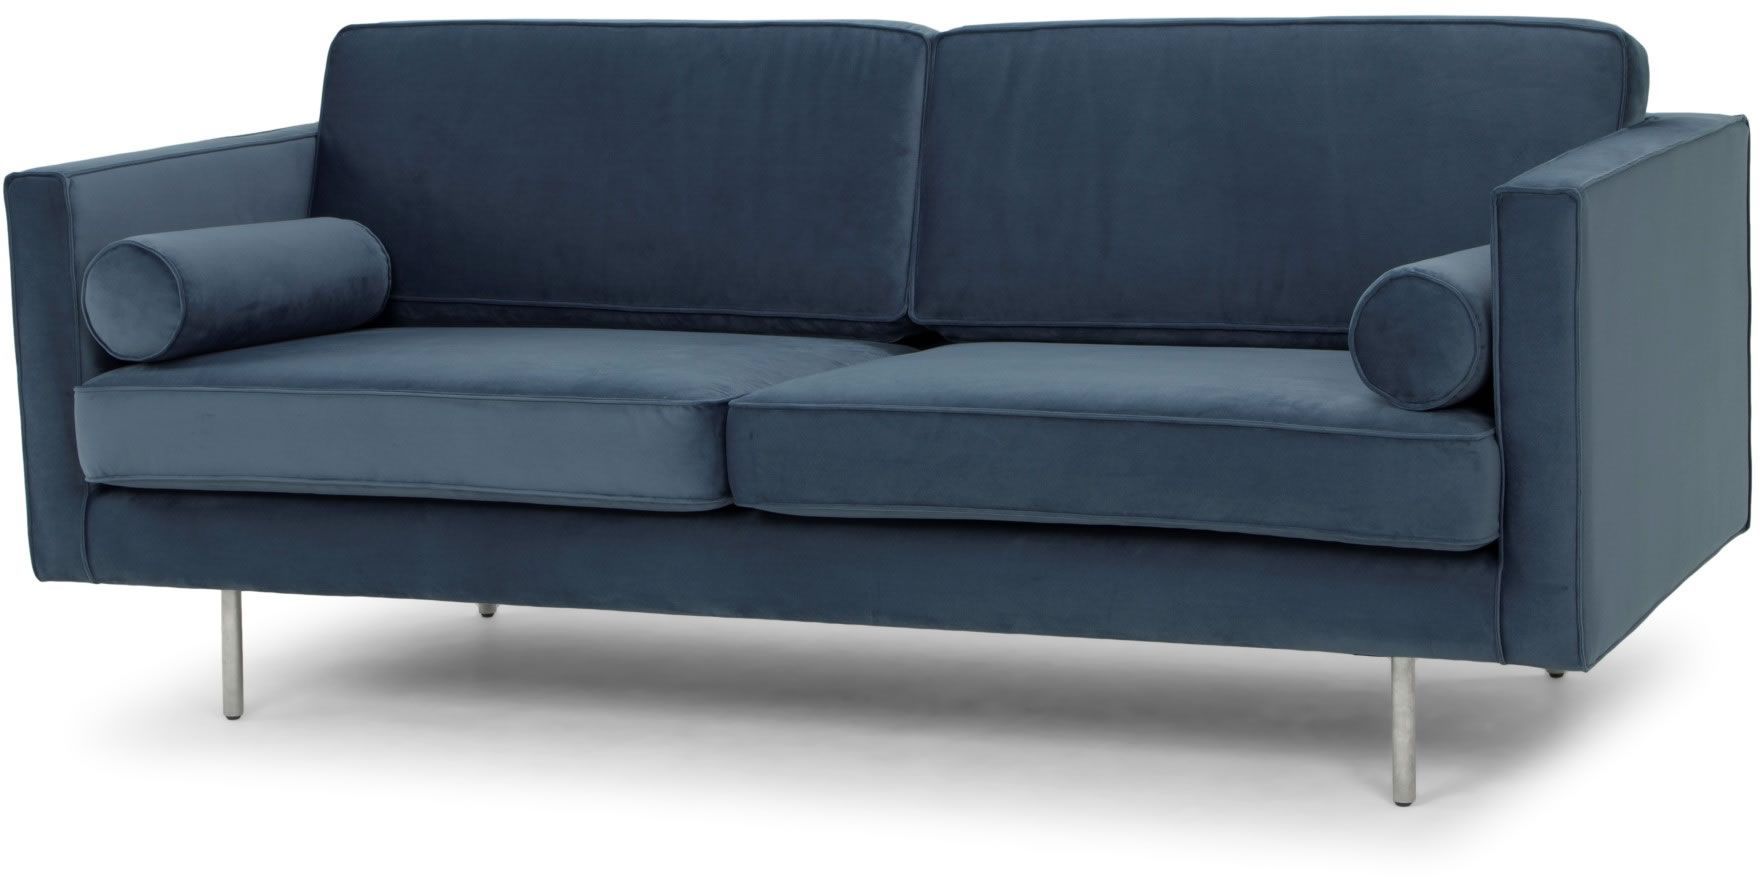 Nuevo Cyrus Triple Seat Sofa (dusty Blue) – Hgsc193 Pertaining To Brayson Chaise Sectional Sofas Dusty Blue (View 7 of 15)